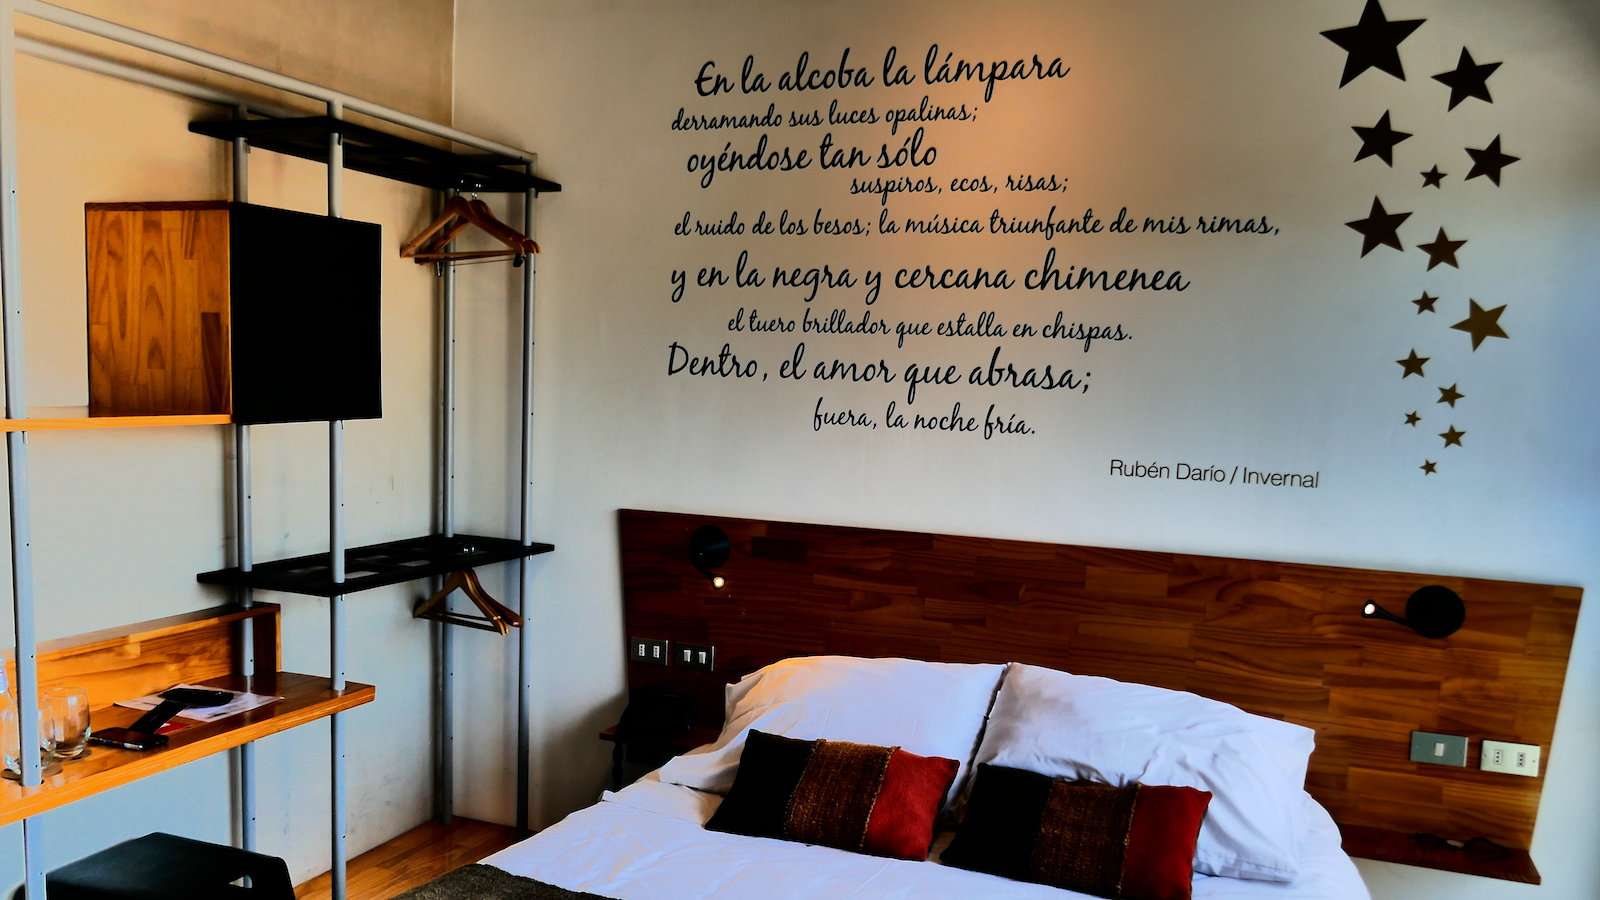 The Verso Hotel is a gay friendly spot in Valparaiso, Chile that embraces art in every way